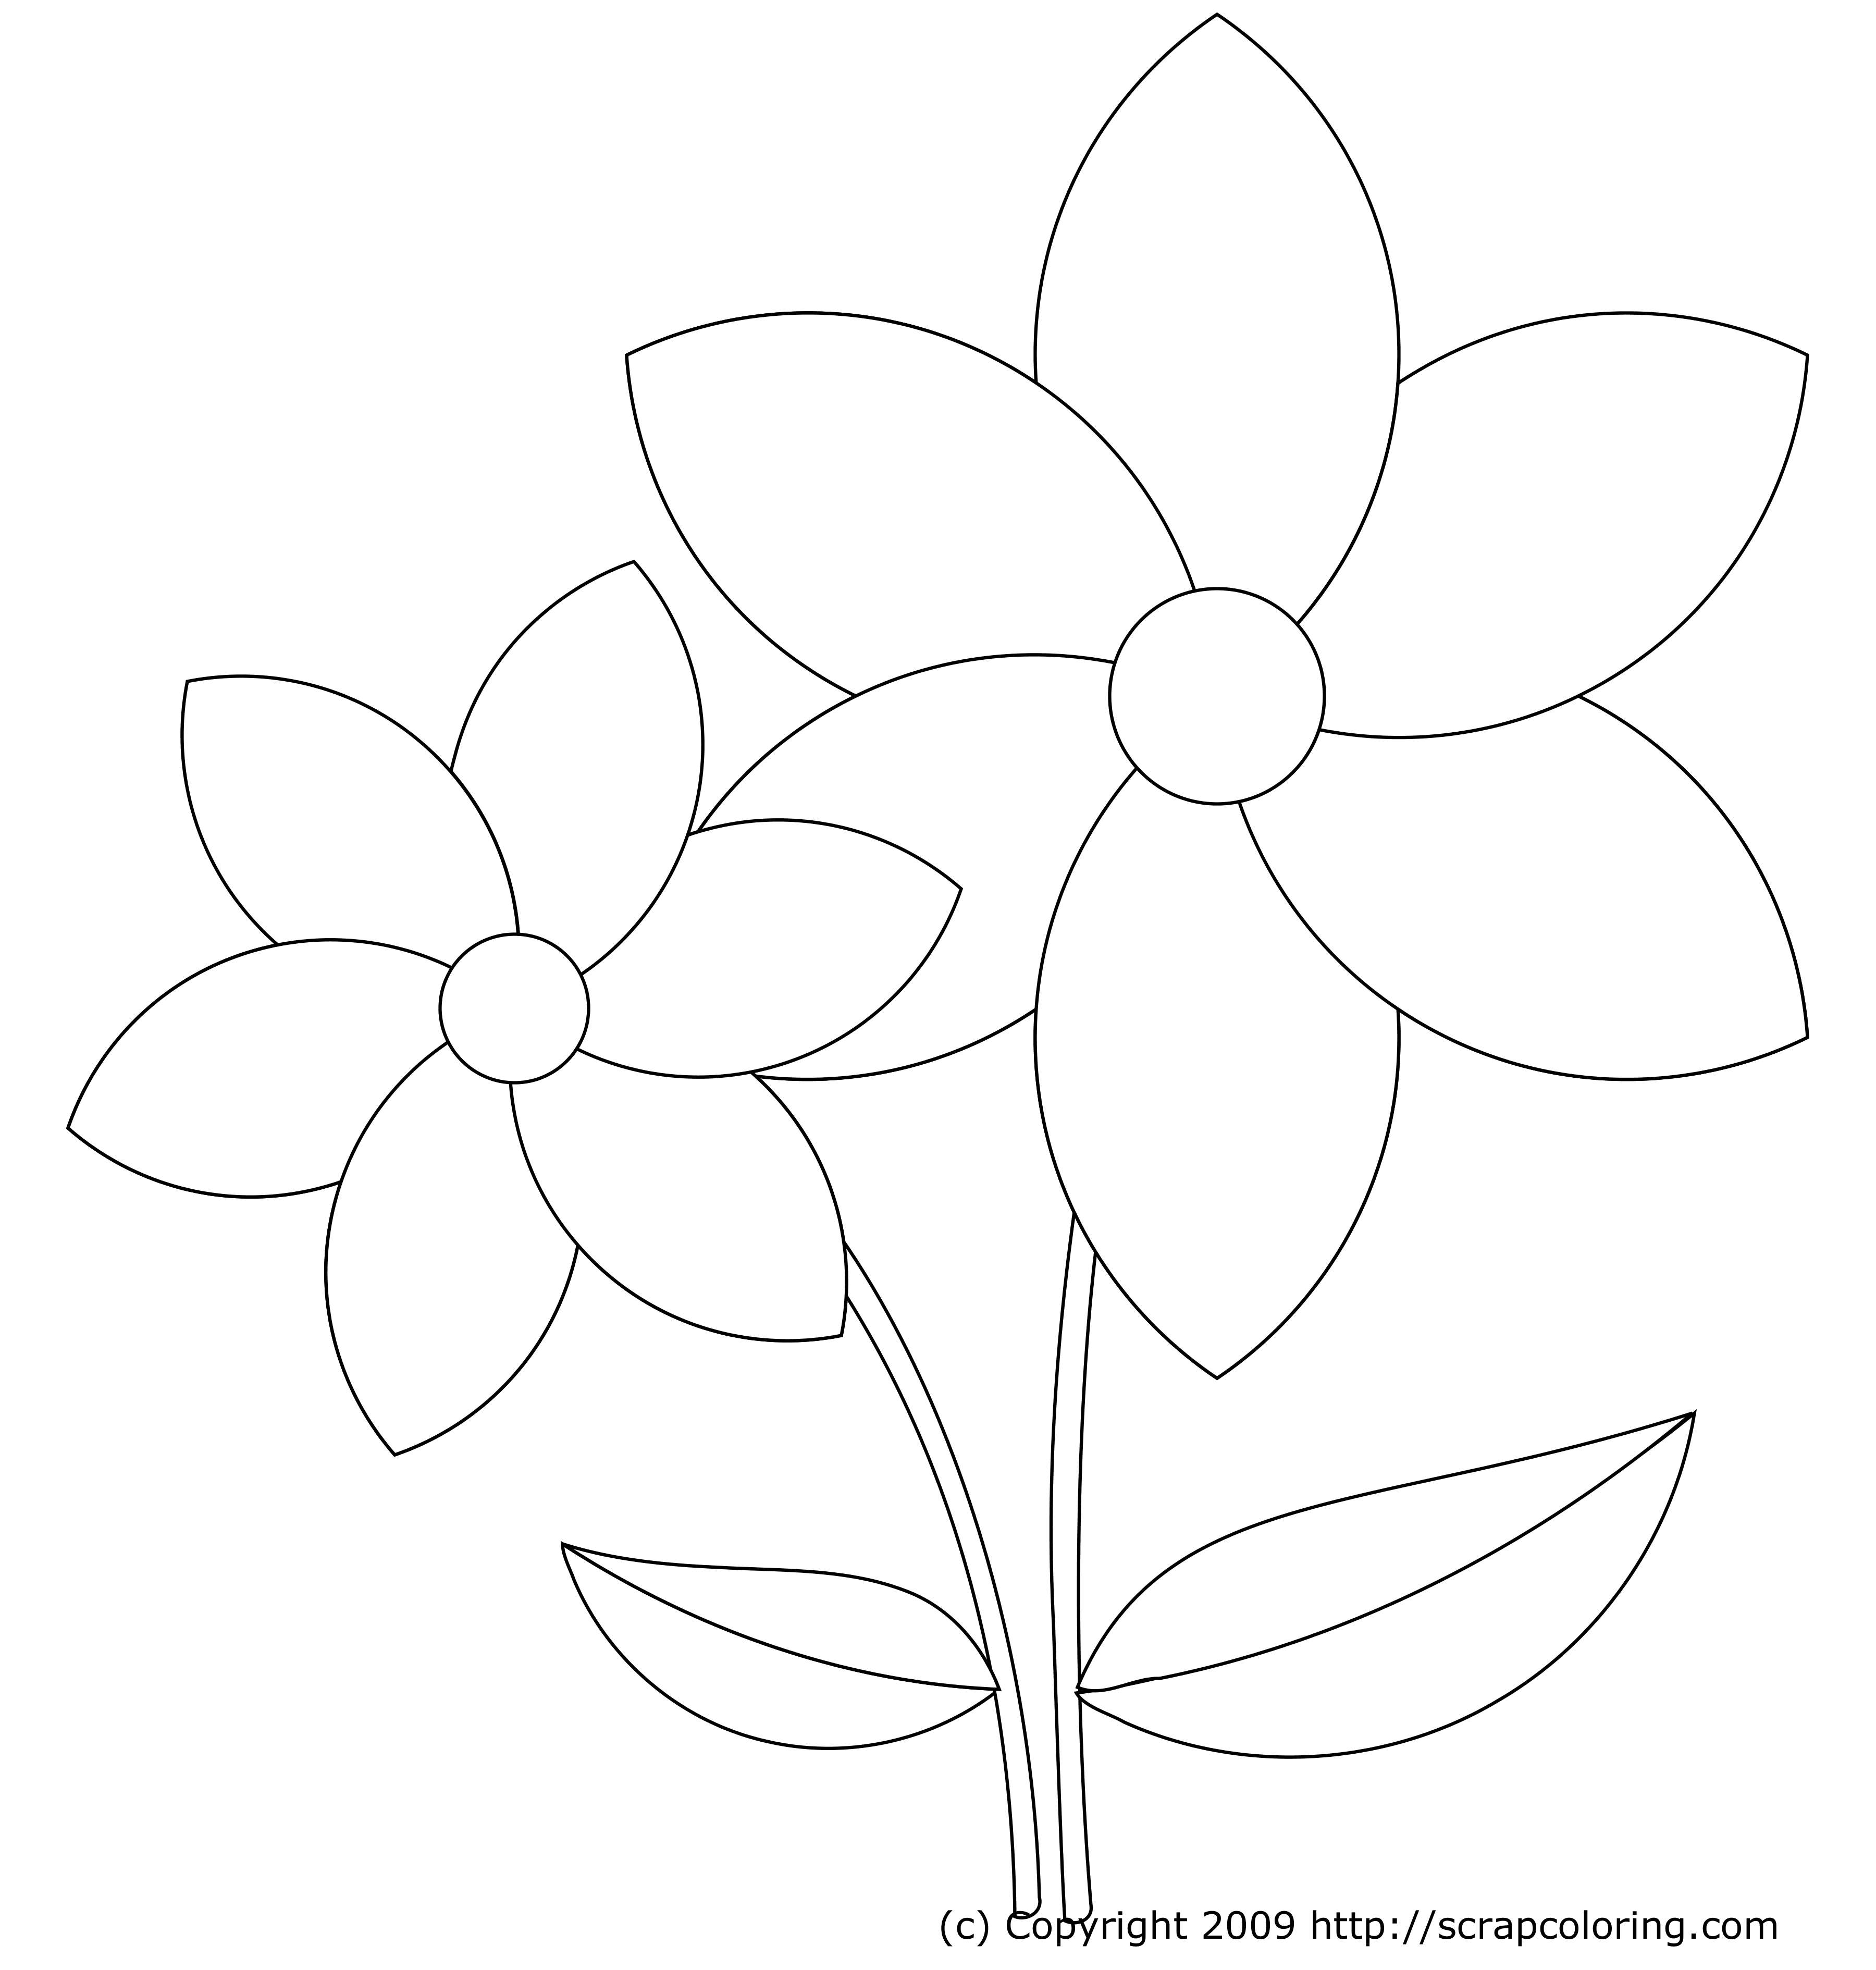 Free Printable Coloring Pages Of Flowers For S - Coloring